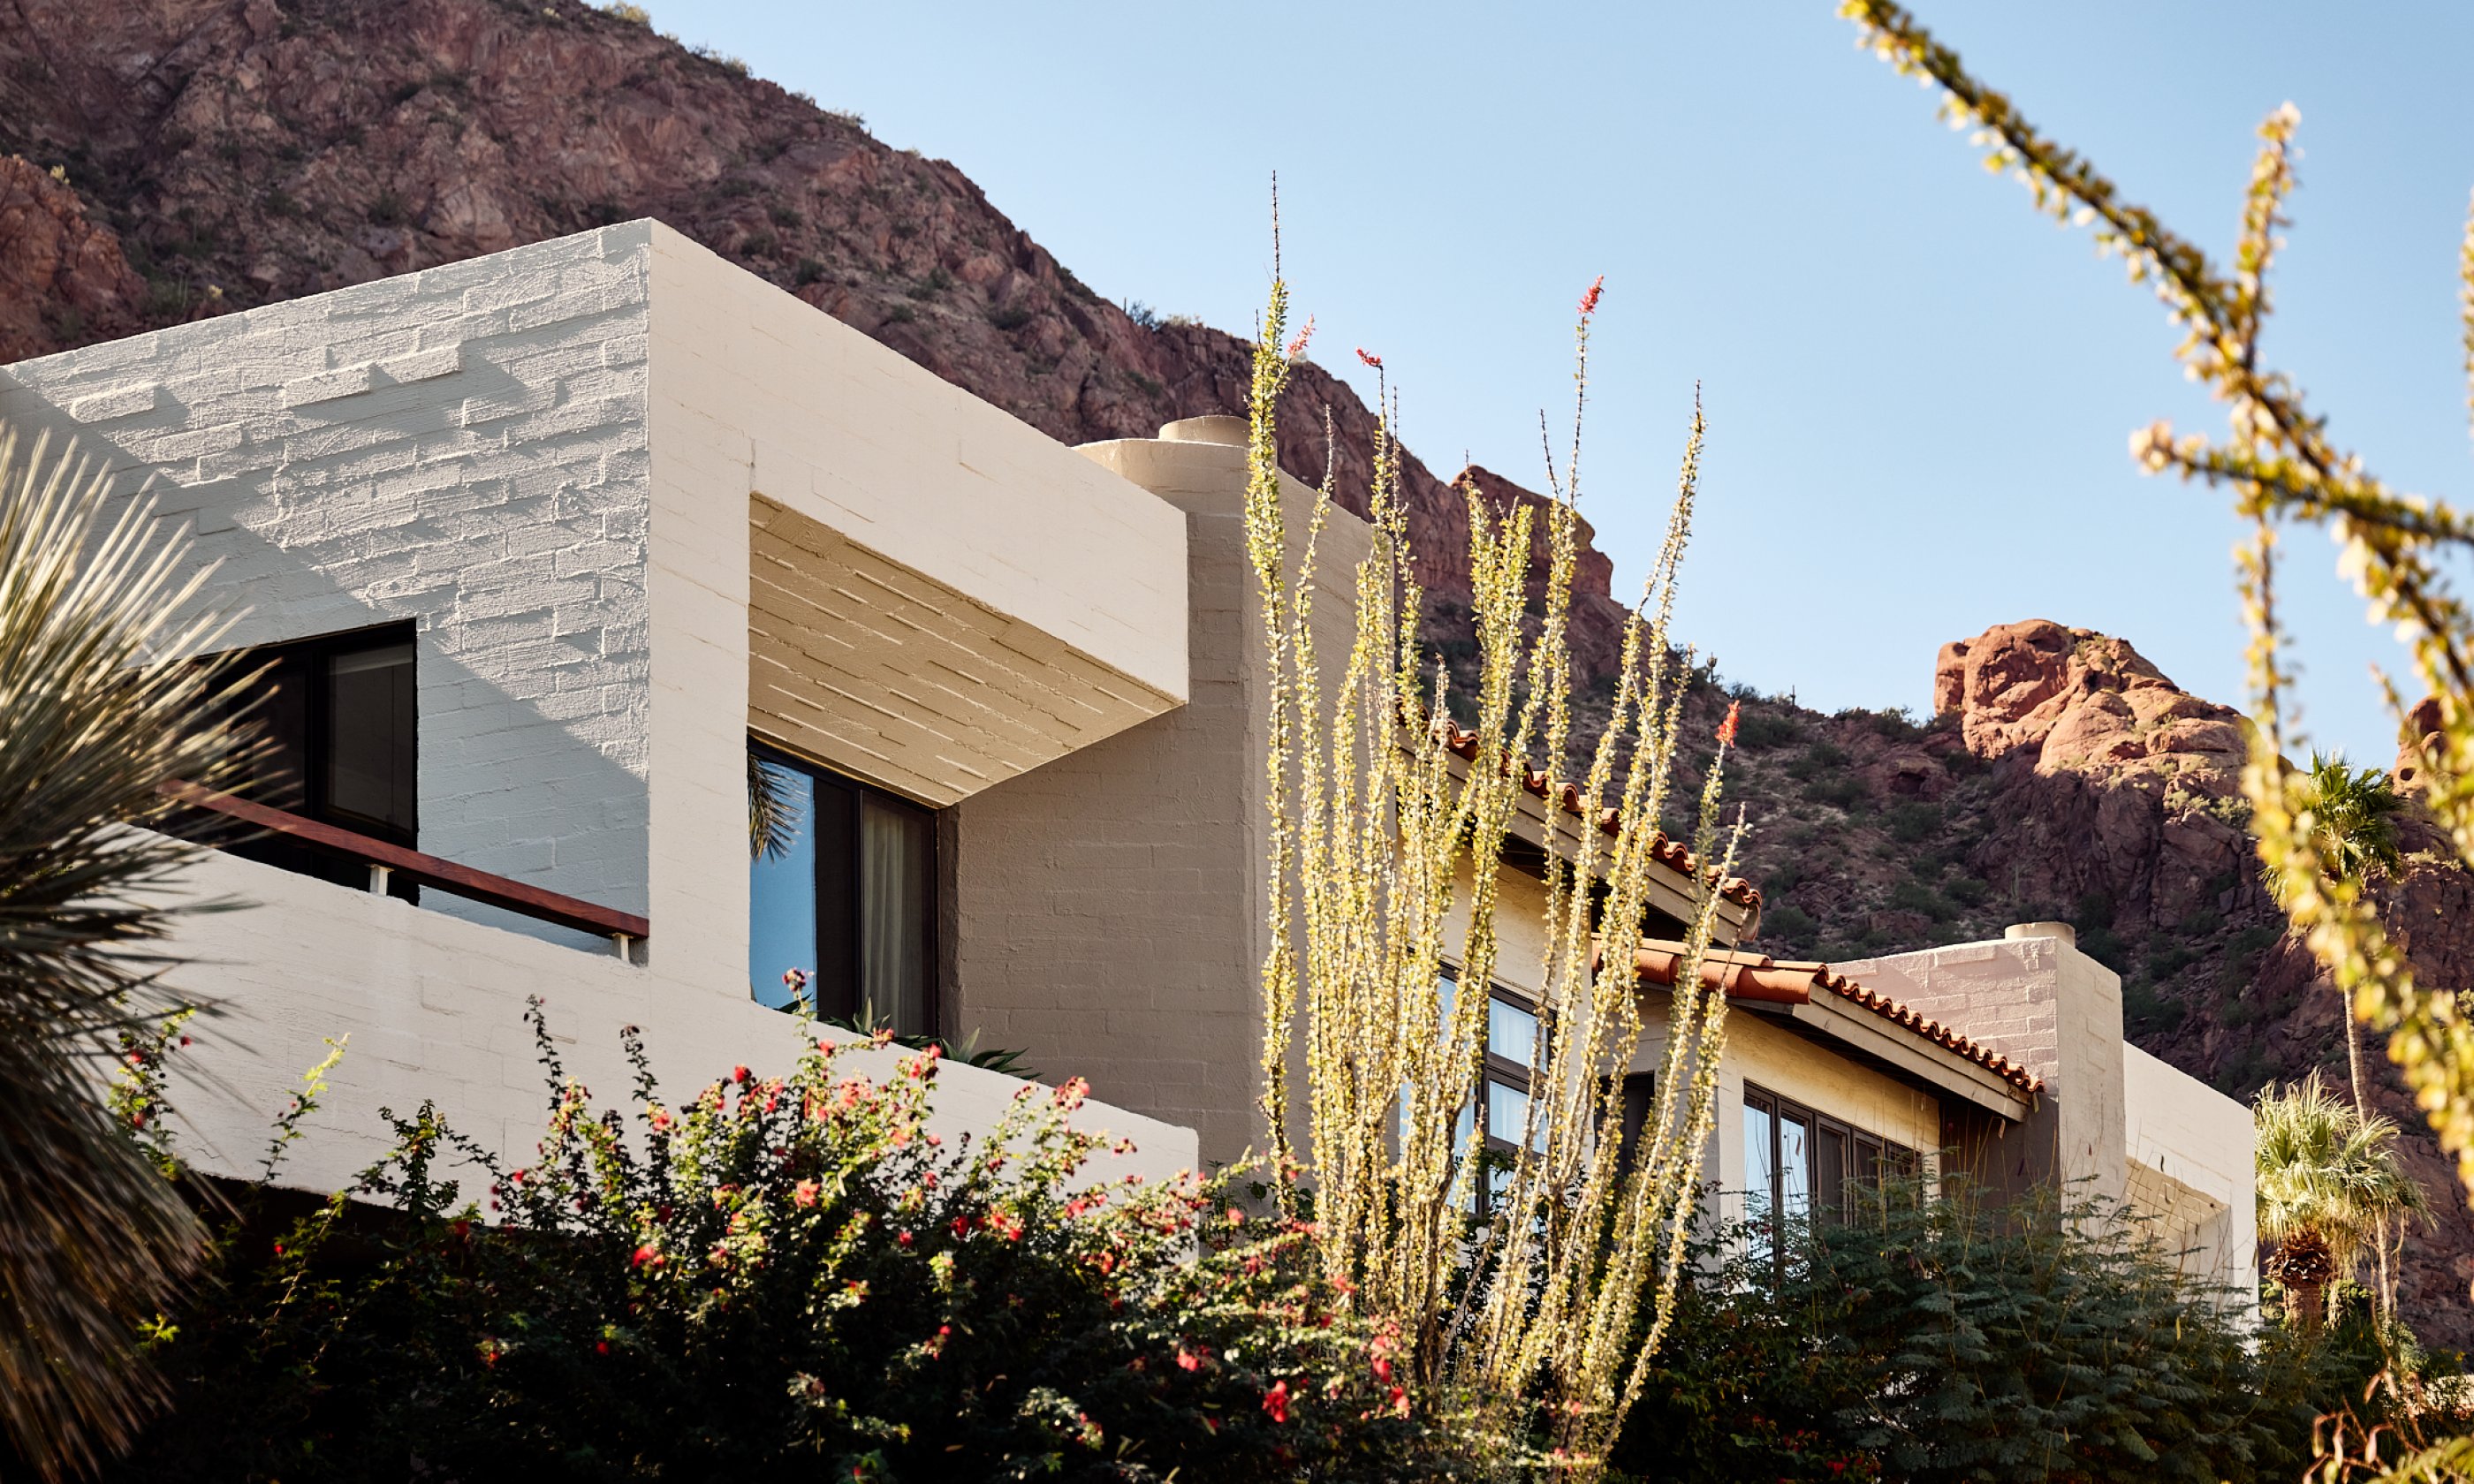 Mountain suite nestled into the side of Camelback Mountain.